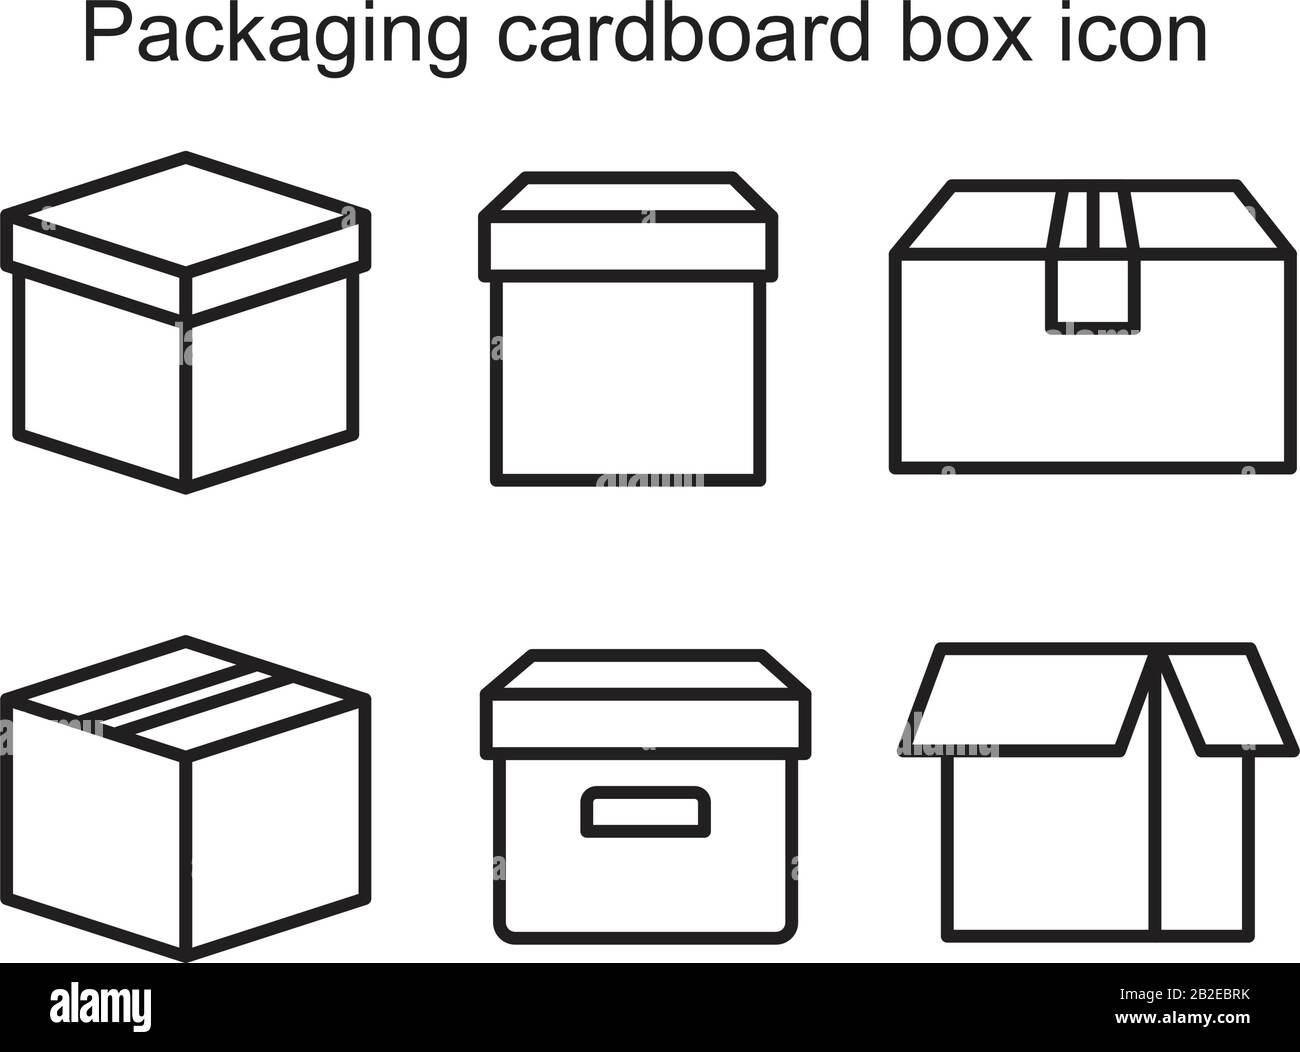 Packaging Cardboard Box Icon Template Black Color Editable Packaging Cardboard Box Icon Symbol Flat Vector Illustration For Graphic And Web Design Stock Vector Image Art Alamy